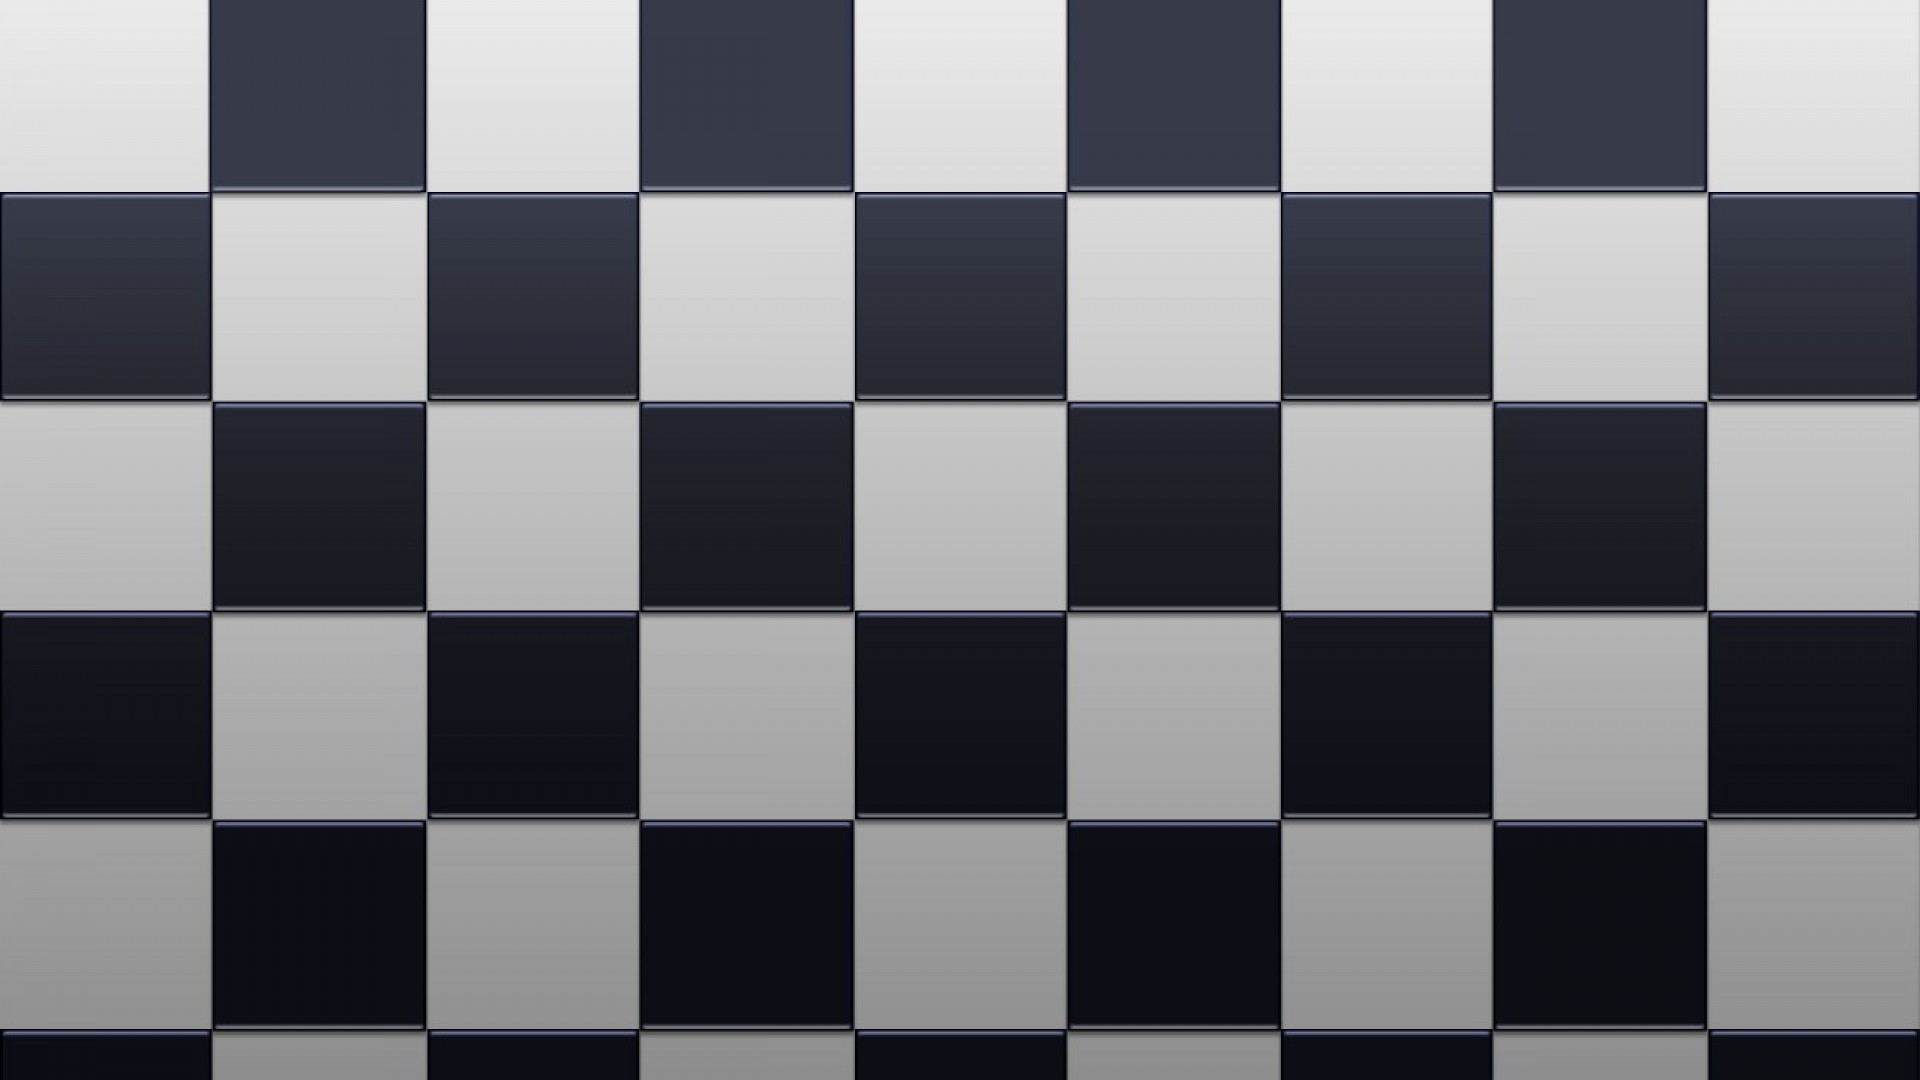 Discard hybrid classmate Chess Board Wallpaper (72+ pictures)